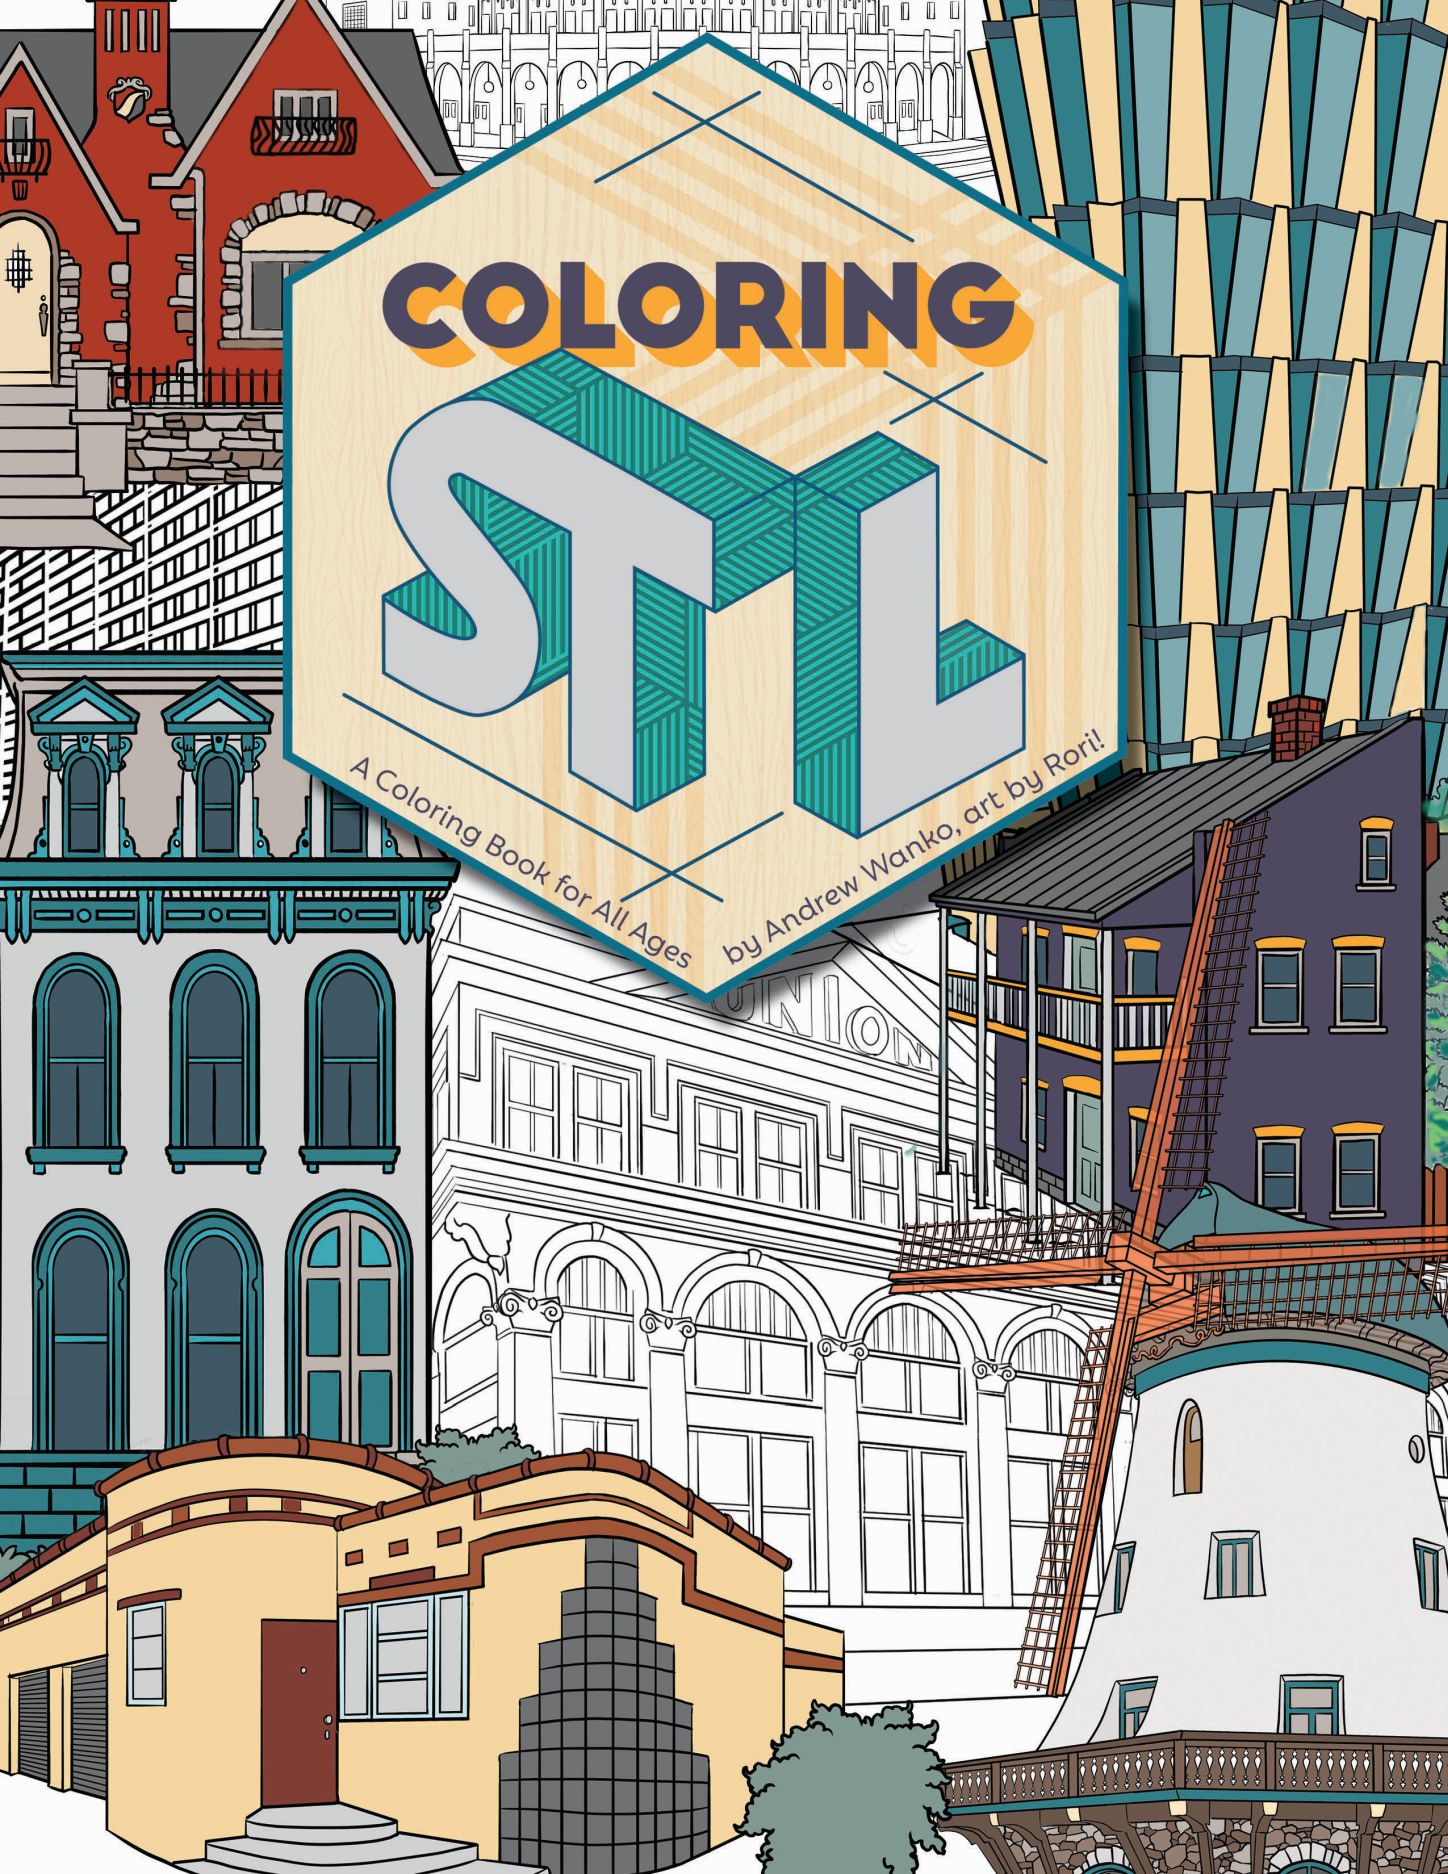 Coloring st louis a coloring book for all ages wanko rori